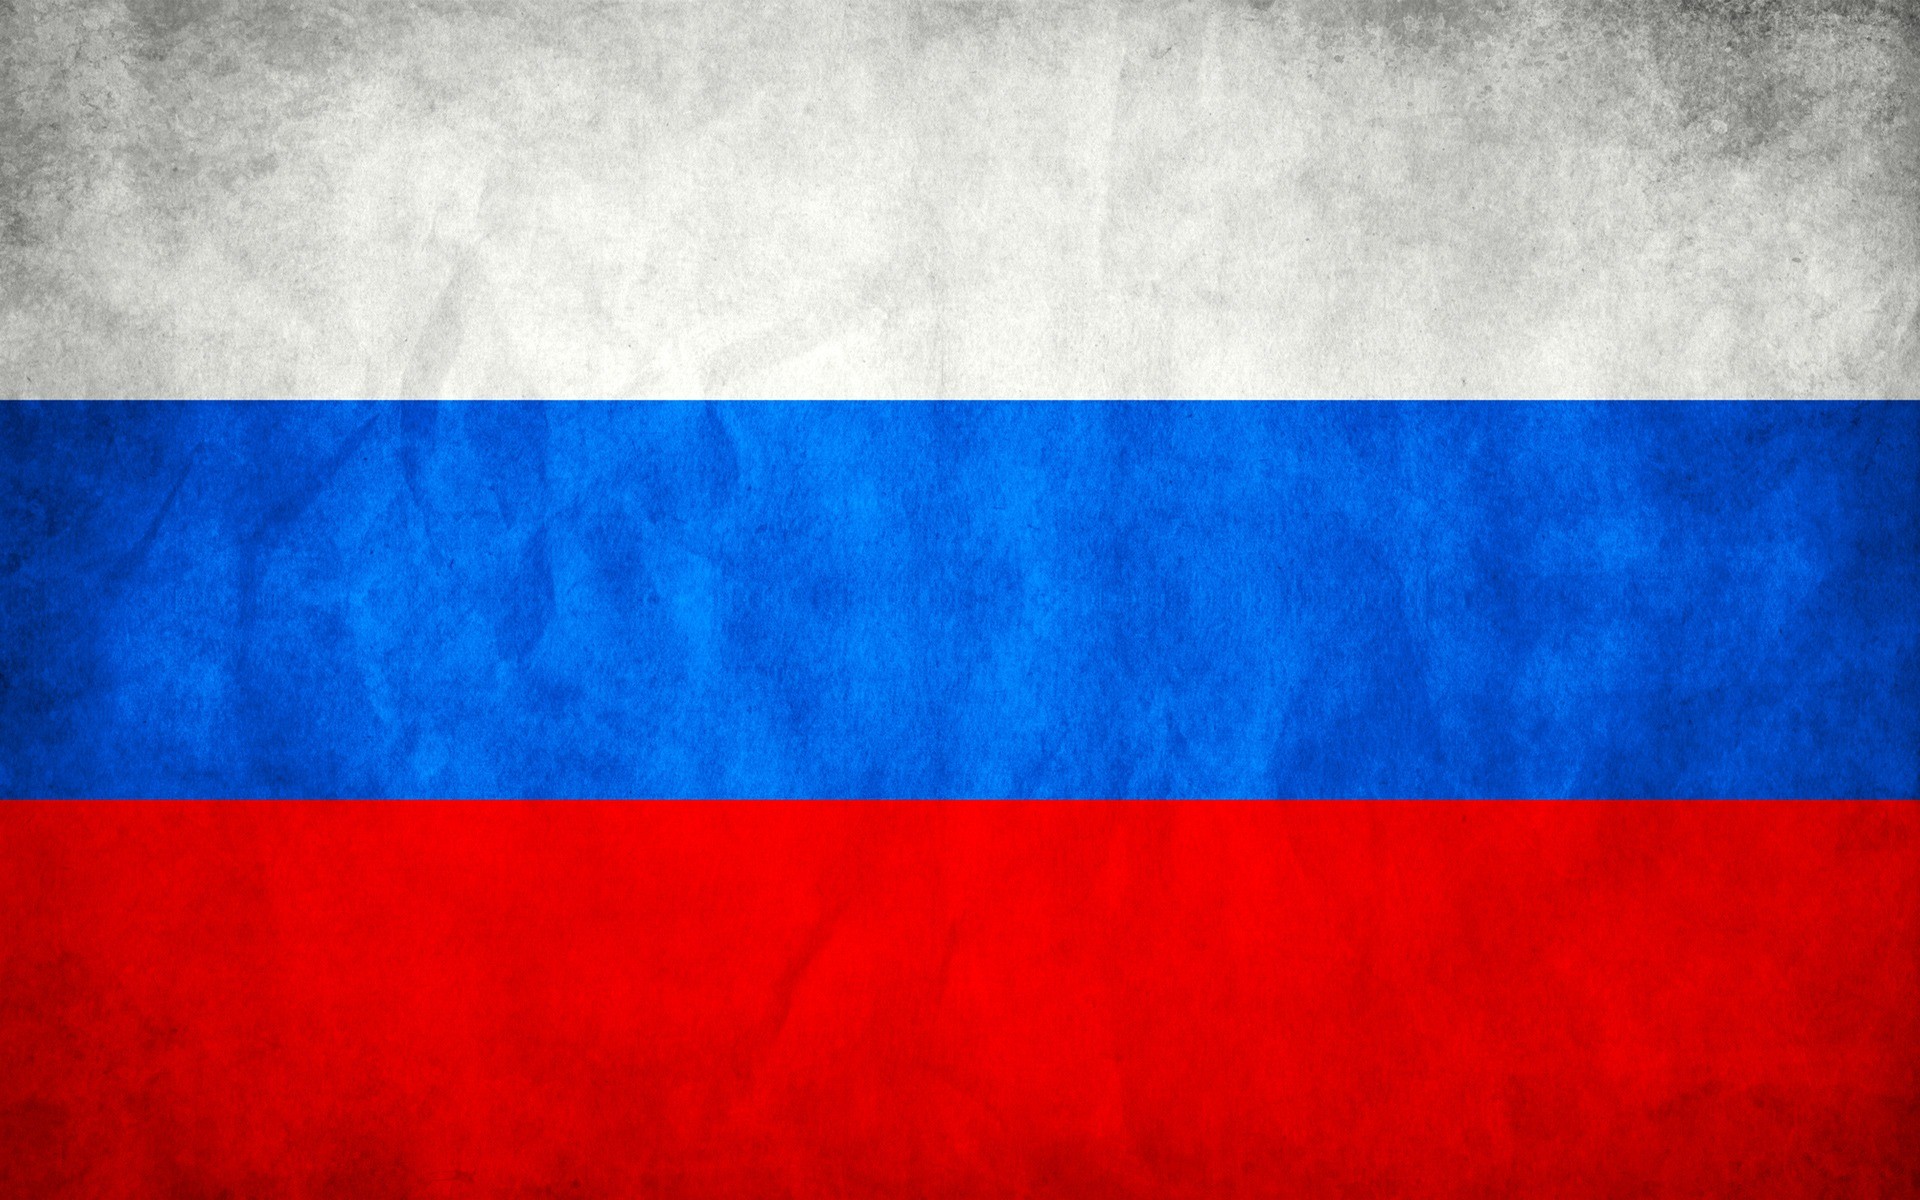 Russian Flag Wallpaper Background 68 images